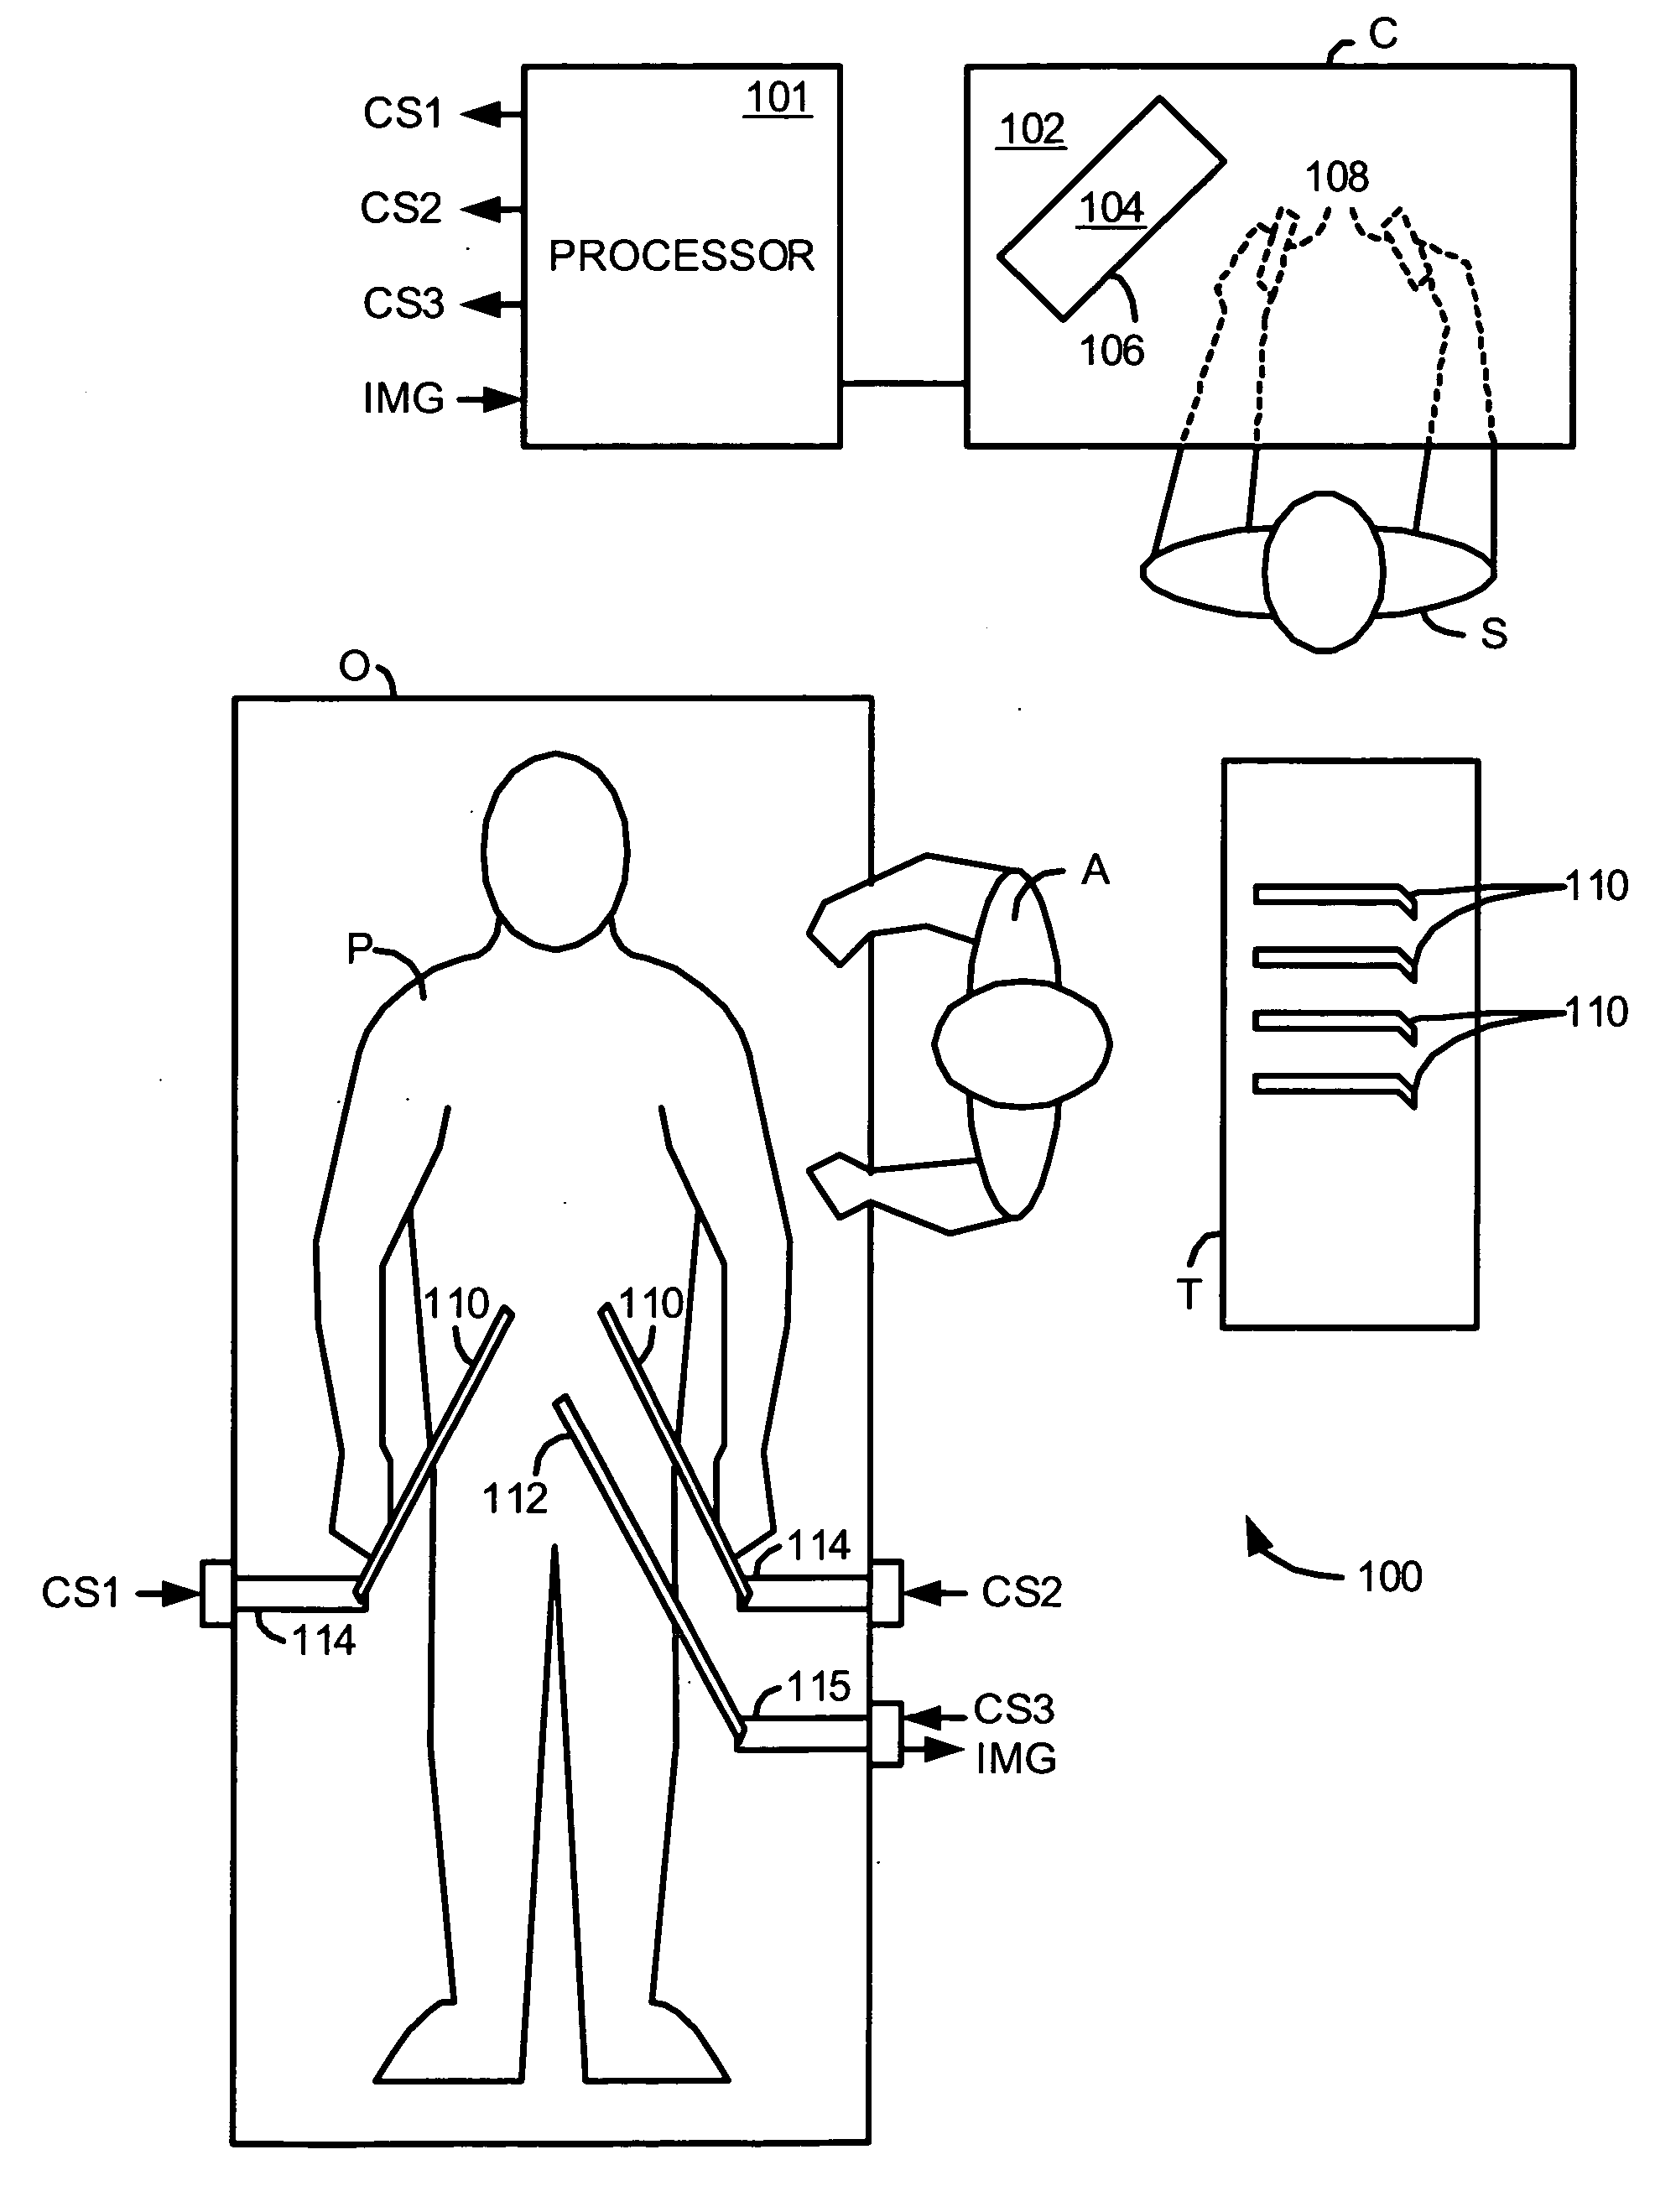 Methods and system for performing 3-D tool tracking by fusion of sensor and/or camera derived data during minimally invasive robotic surgery